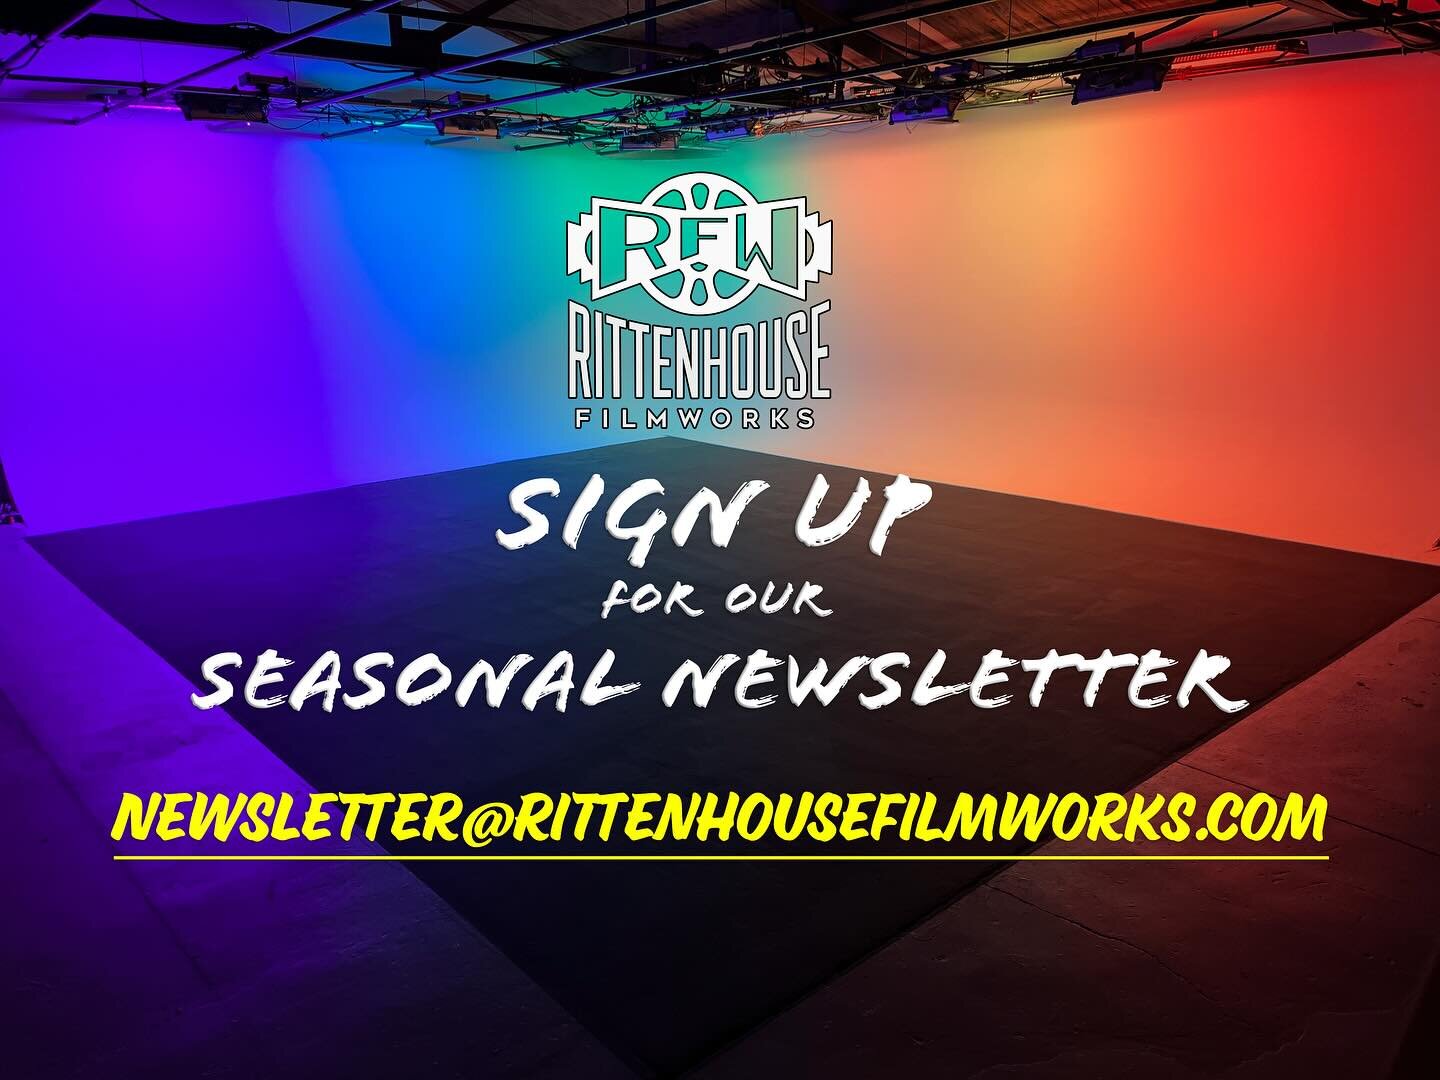 Stay up to date and don&rsquo;t miss an opportunity to save some 💸💸
Sign Up to receive our Seasonal Newsletter!
Each Newsletter features a Promo Code good for your next booking. 

#shotatrittenhouse #rittenhousefilmworks #soundstage #phillyfilm #st